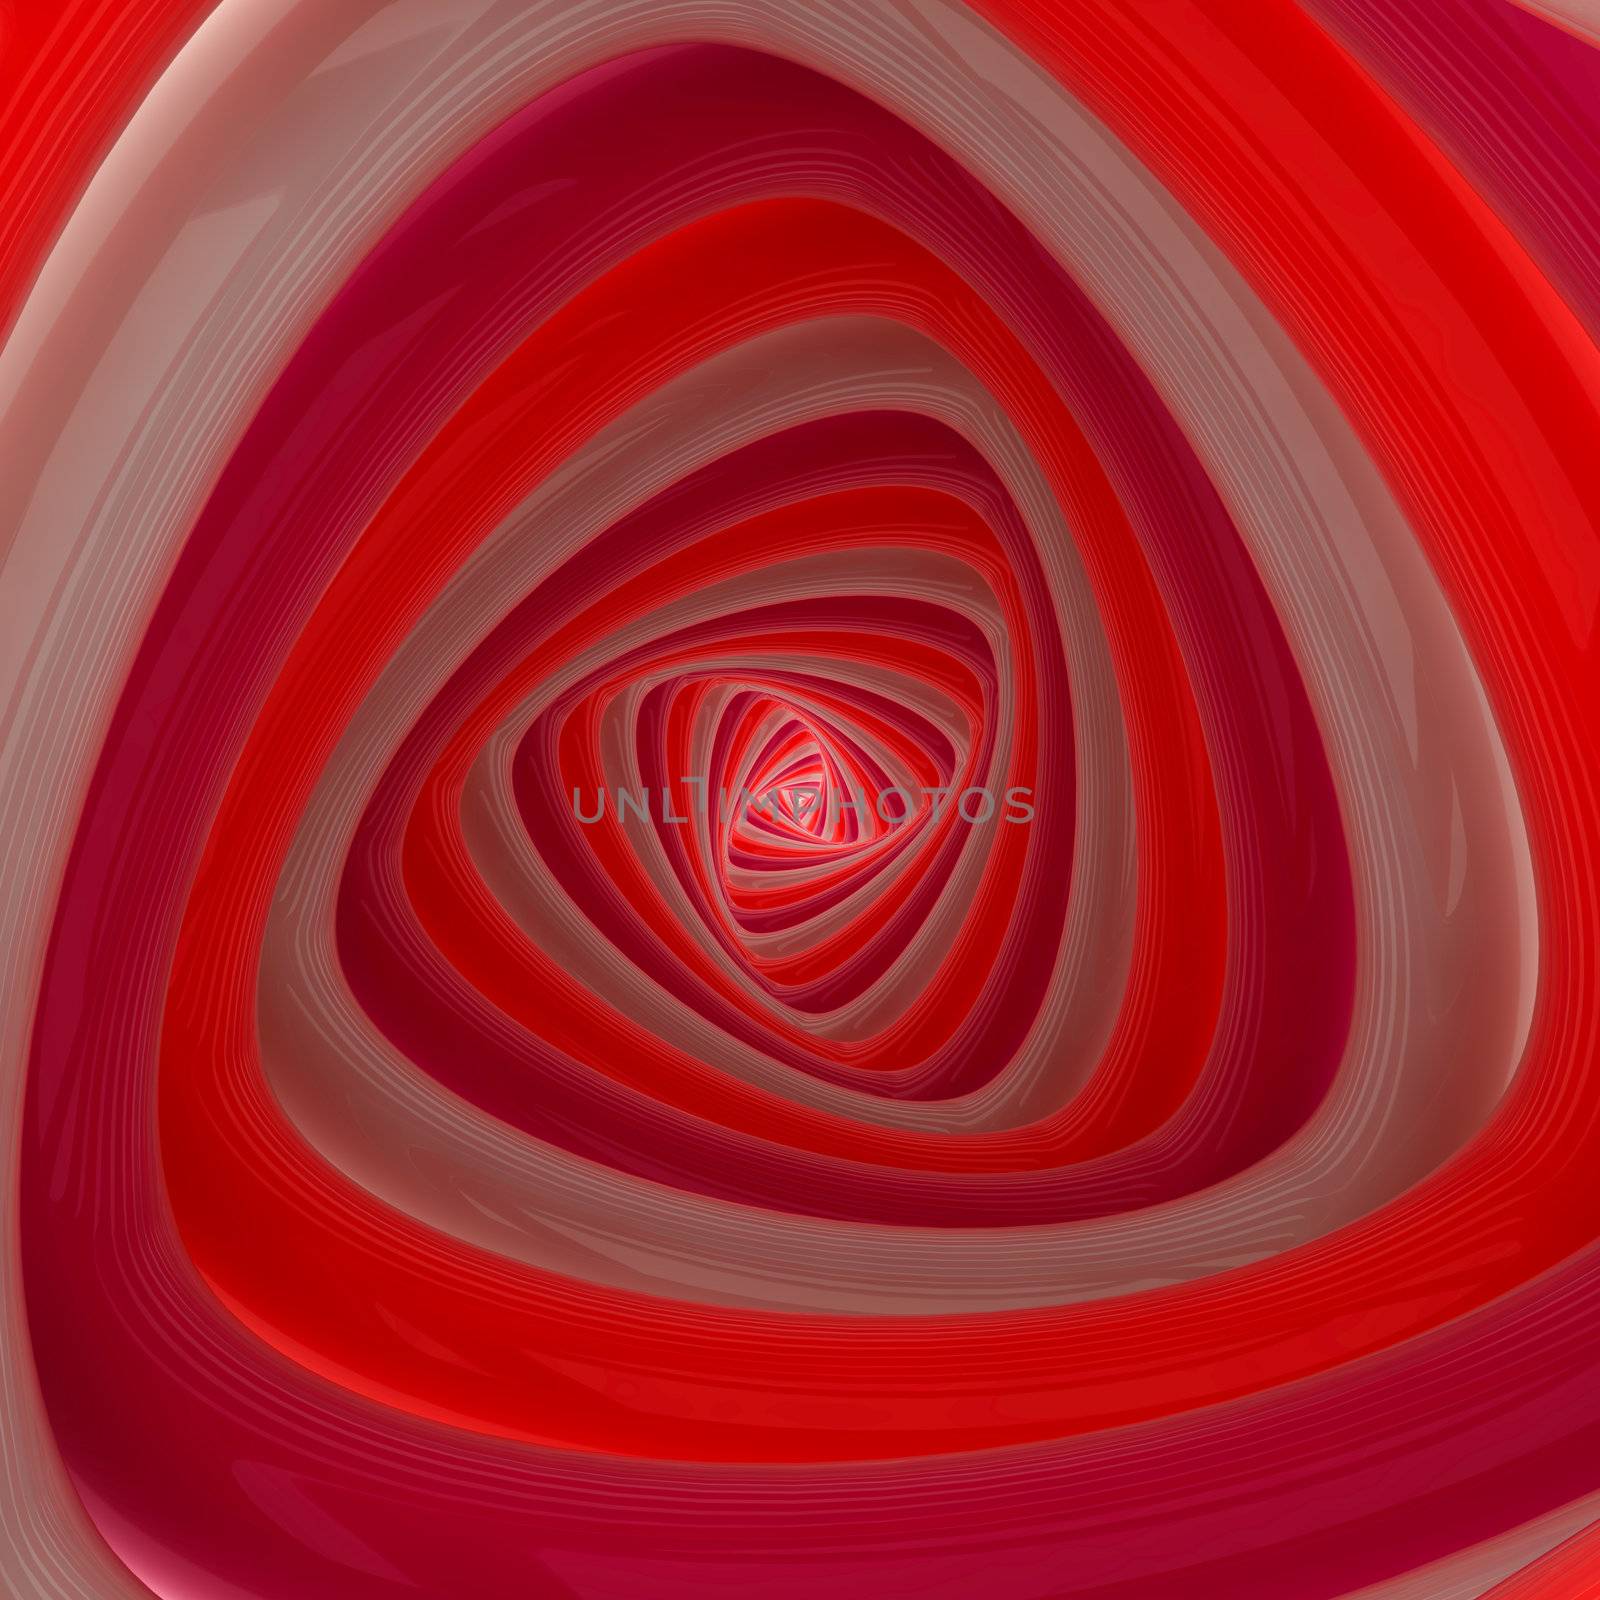 Triangular vortex of red and pink colors